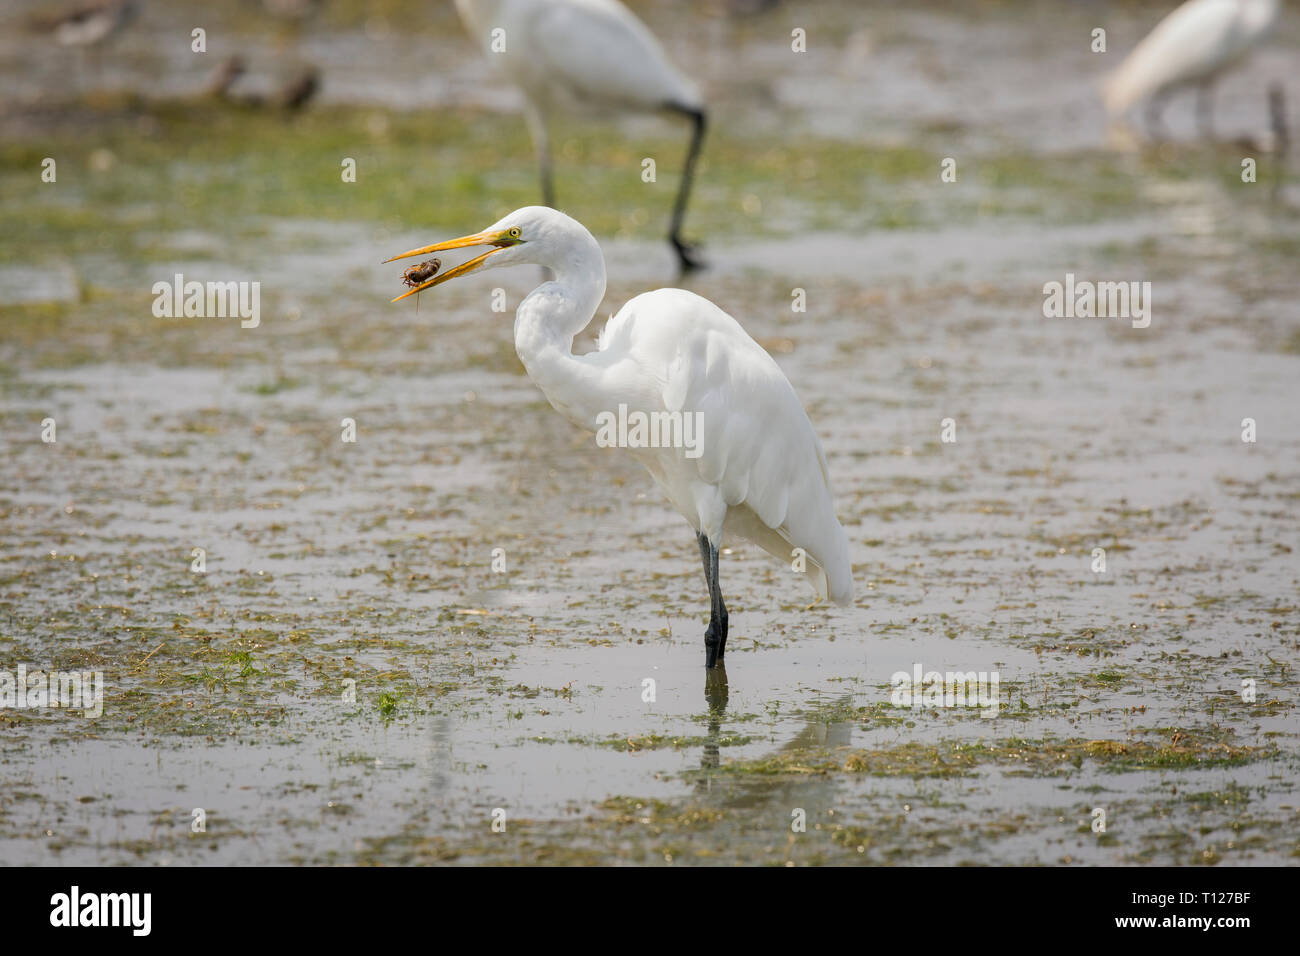 Great Egret feeding on a crayfish during draining of wastewater treatrment pond in Petaluma, Sonoma County, California Stock Photo